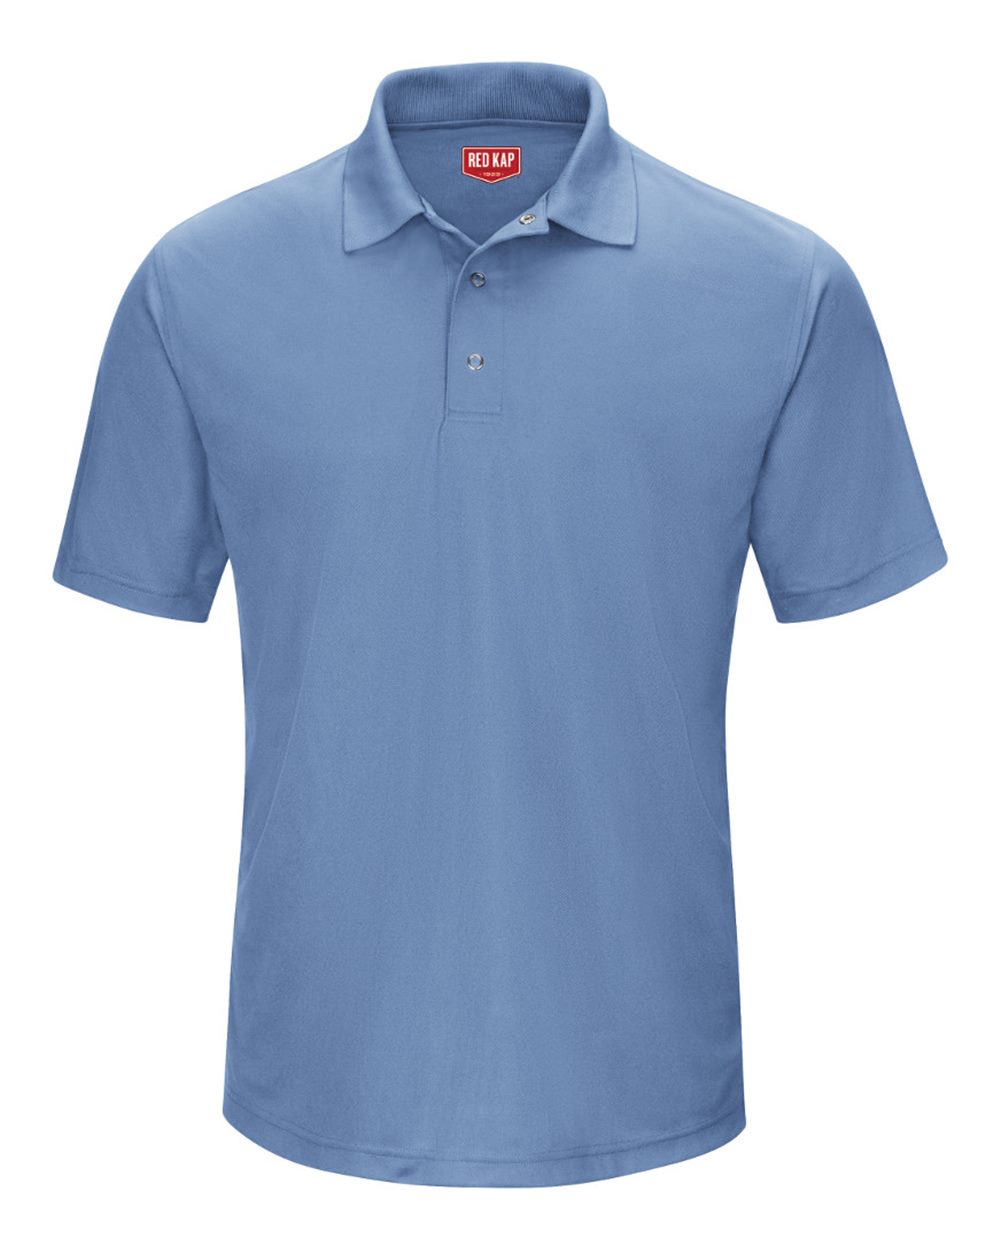 19730 Short Sleeve Performance Knit Gripper-Front Polo - SK74